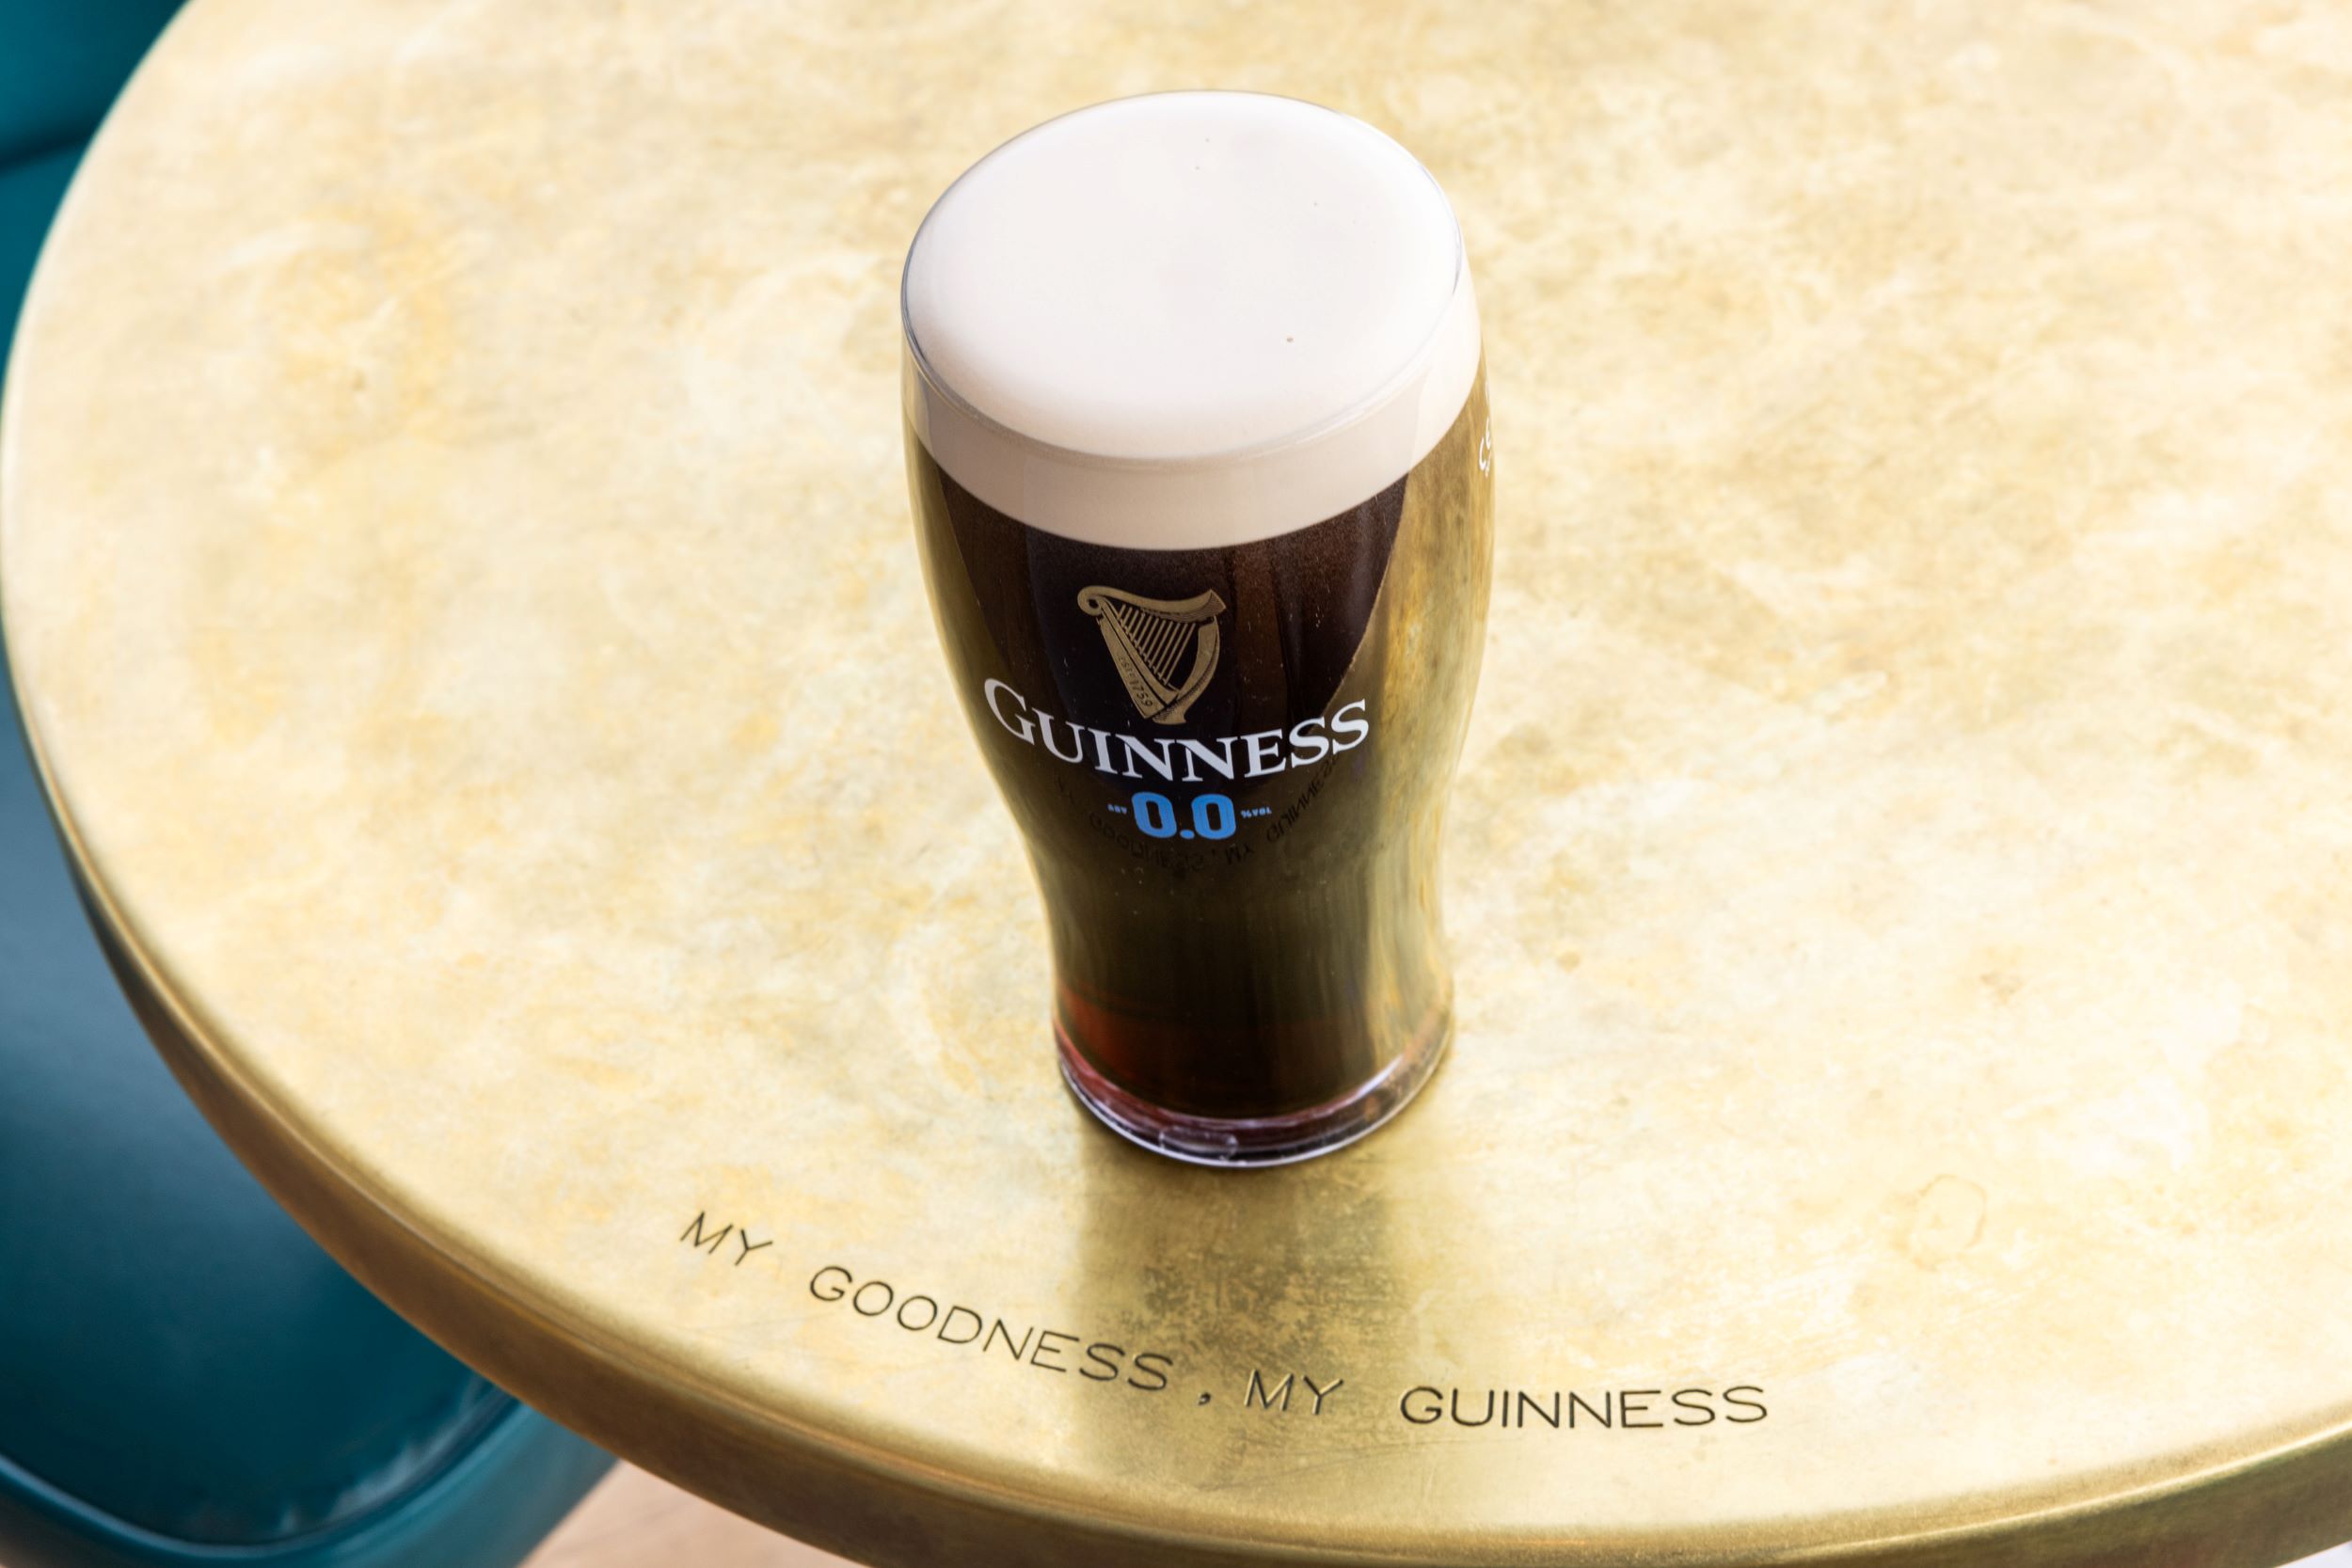 A beautiful pint of Guinness 0.0 perfect sit on a table where you can see engraved the tagline My Goodness, My Guinness